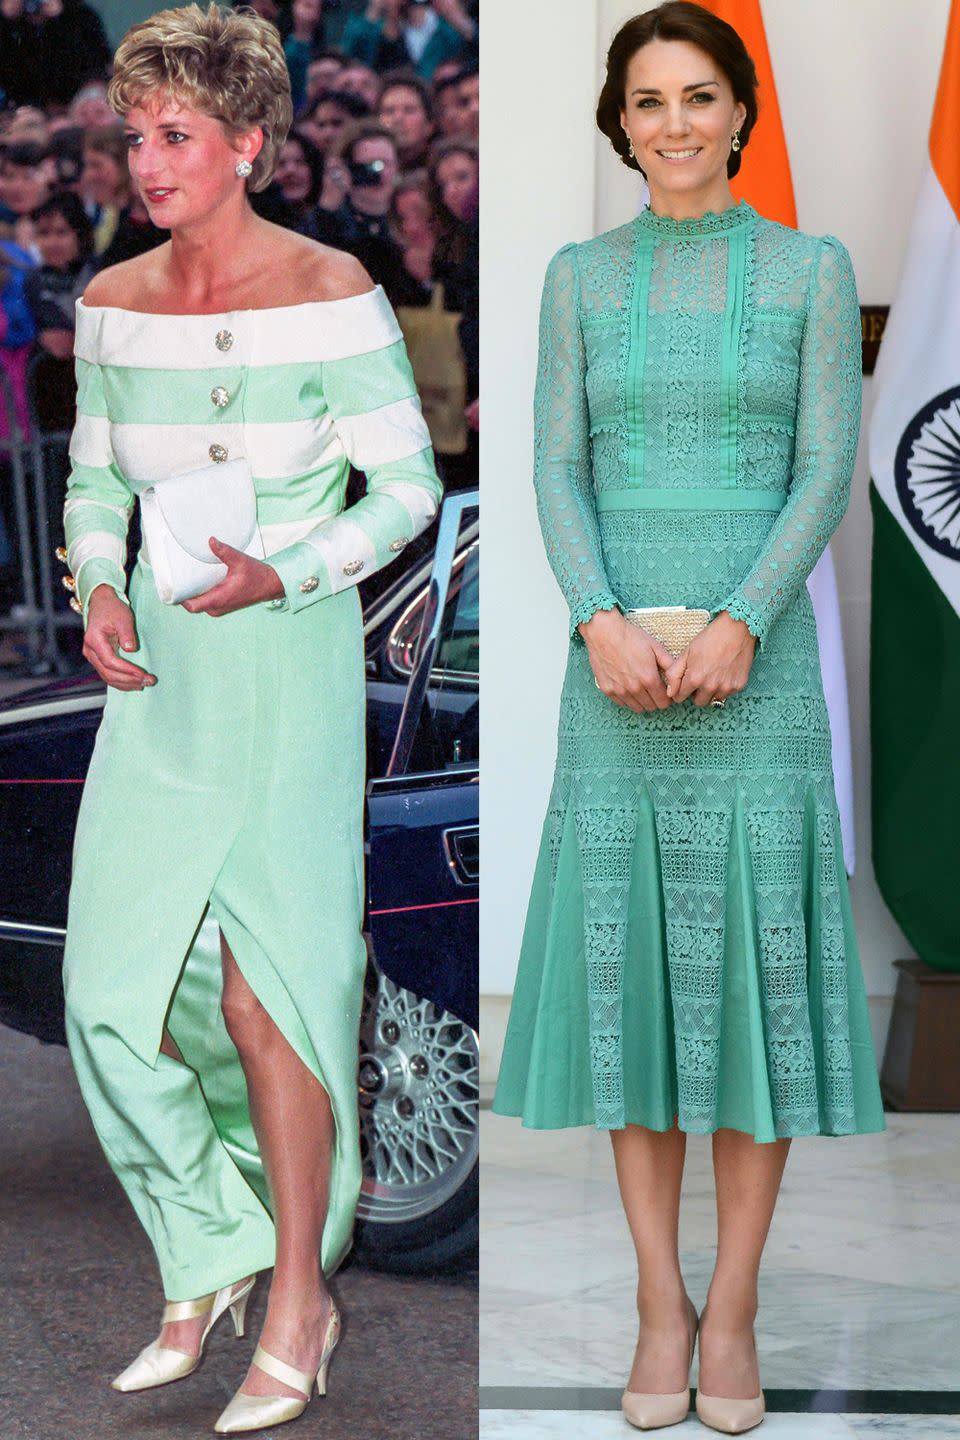 <p>Diana attending a premiere in London's West End in April 1993; Kate in Temperley London meeting the Prime Minister of India in New Delhi in April 2016.</p>